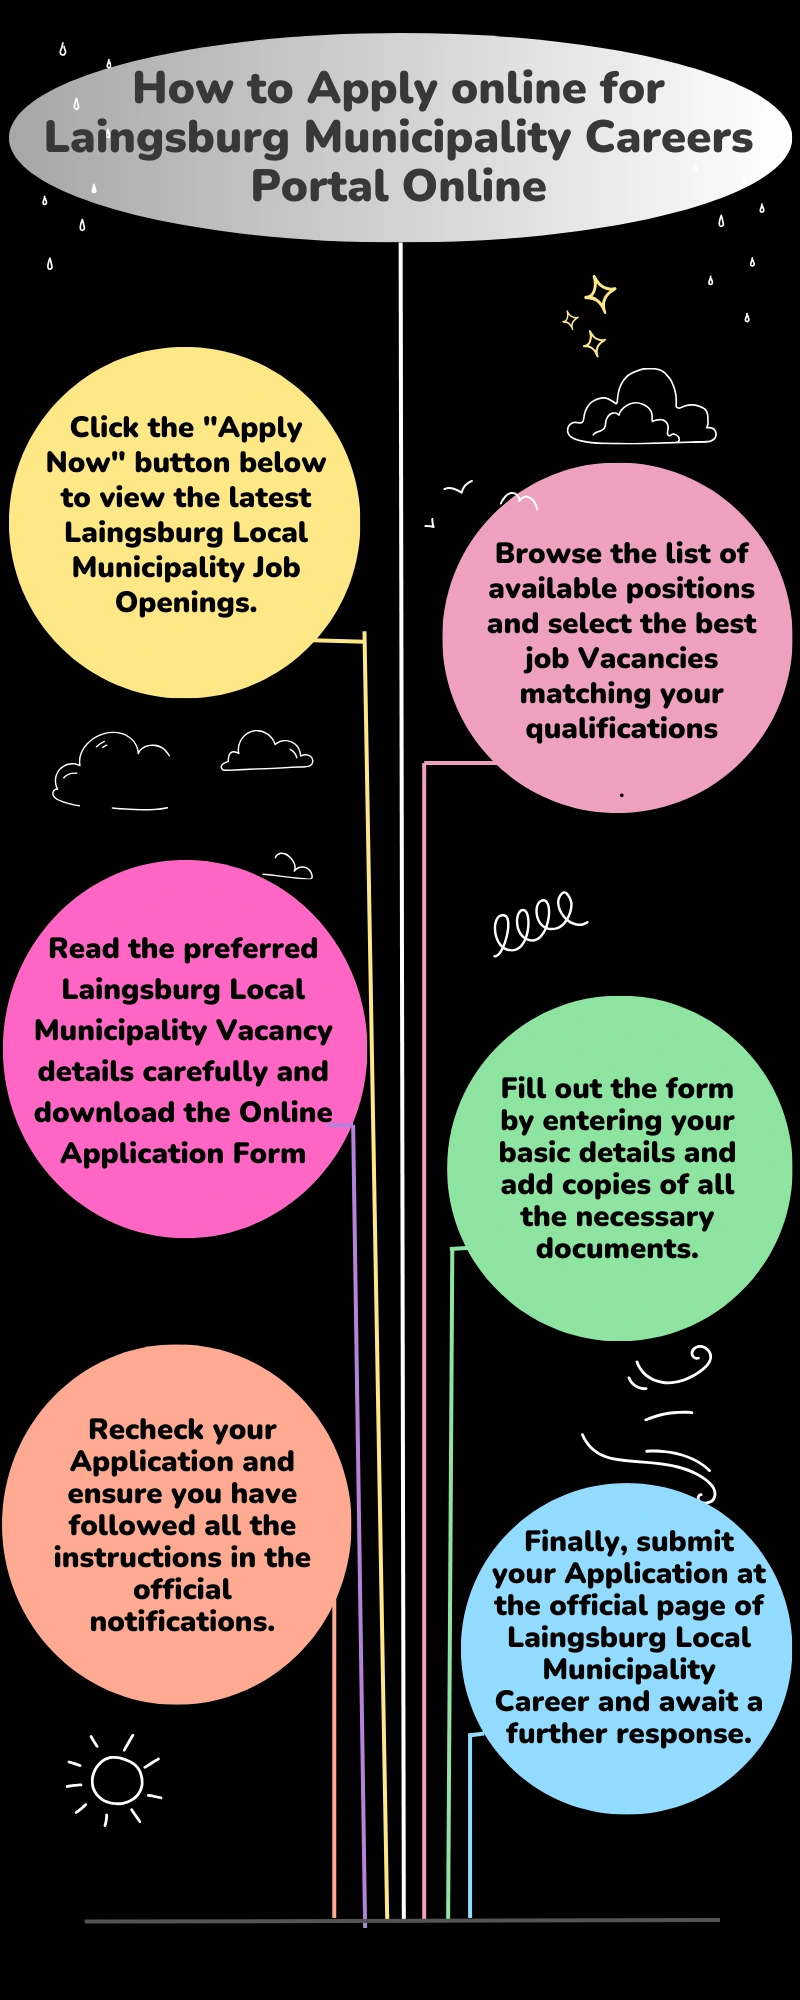 How to Apply online for Laingsburg Municipality Careers Portal Online